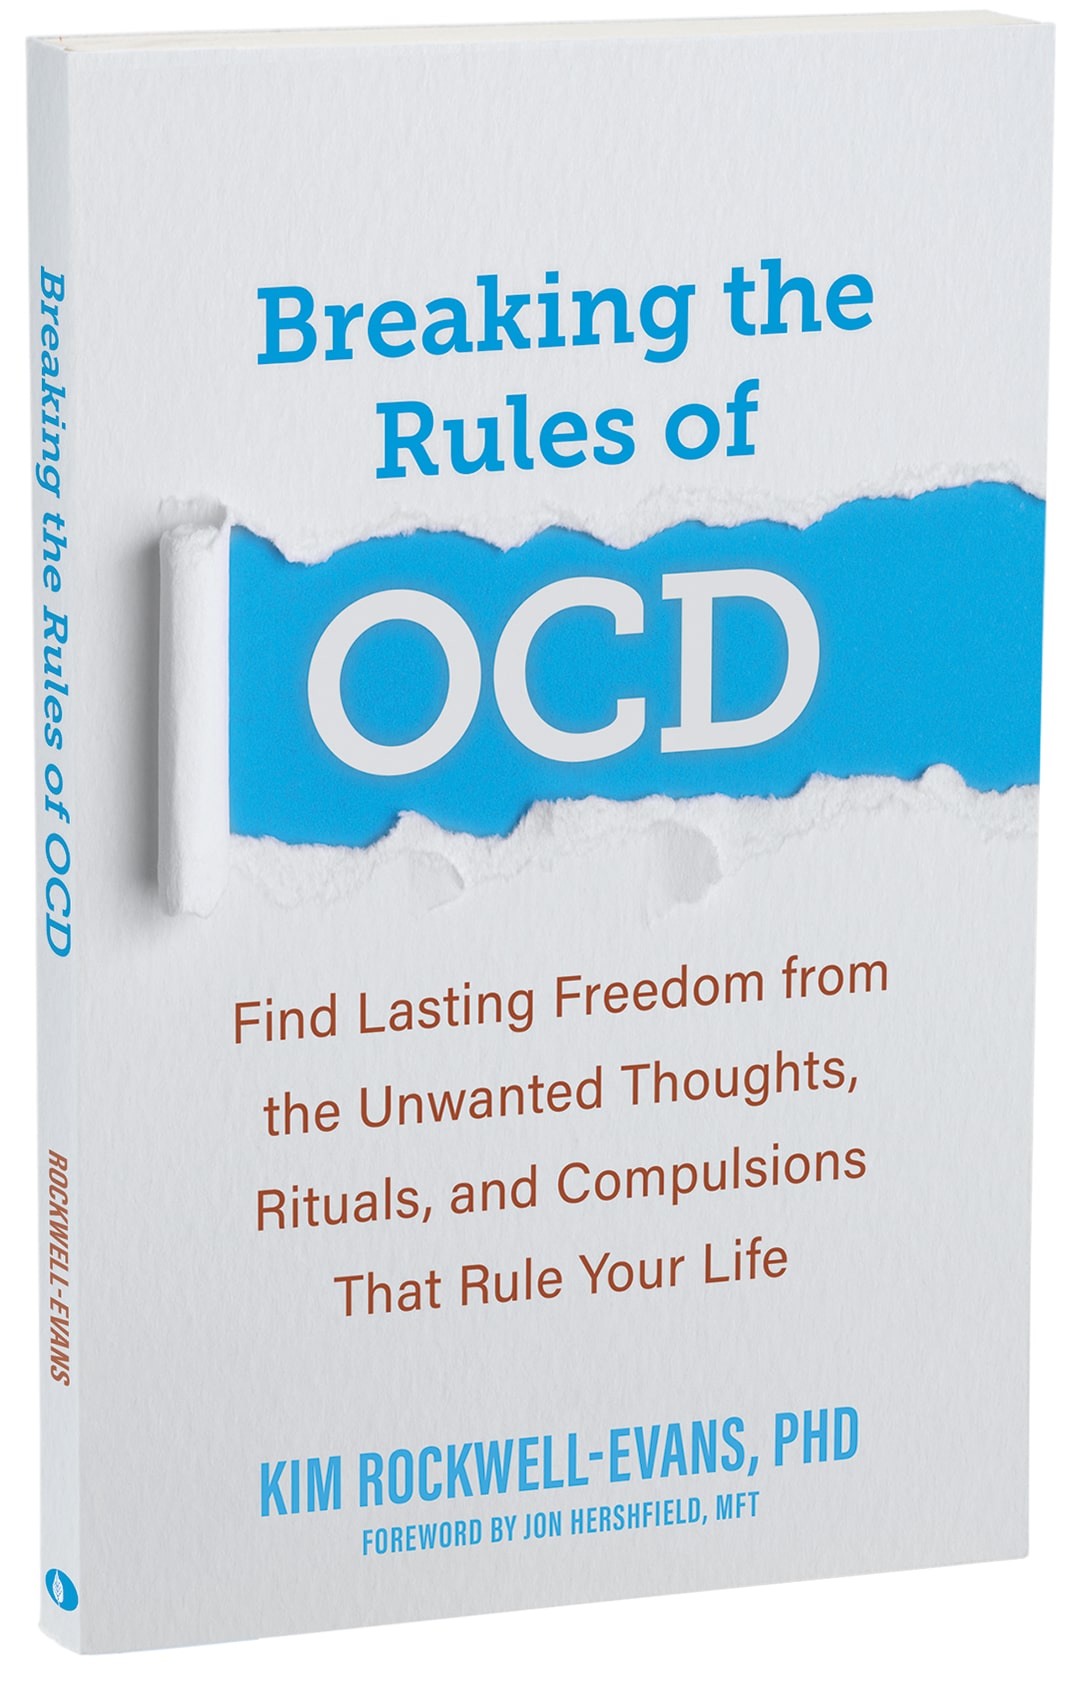 "Breaking the Rules of OCD. Find Lasting Freedom from the Unwanted Thoughts, Rituals, and Compulsions That Rule Your Life" by Kim Rockwell-Evans, PHD